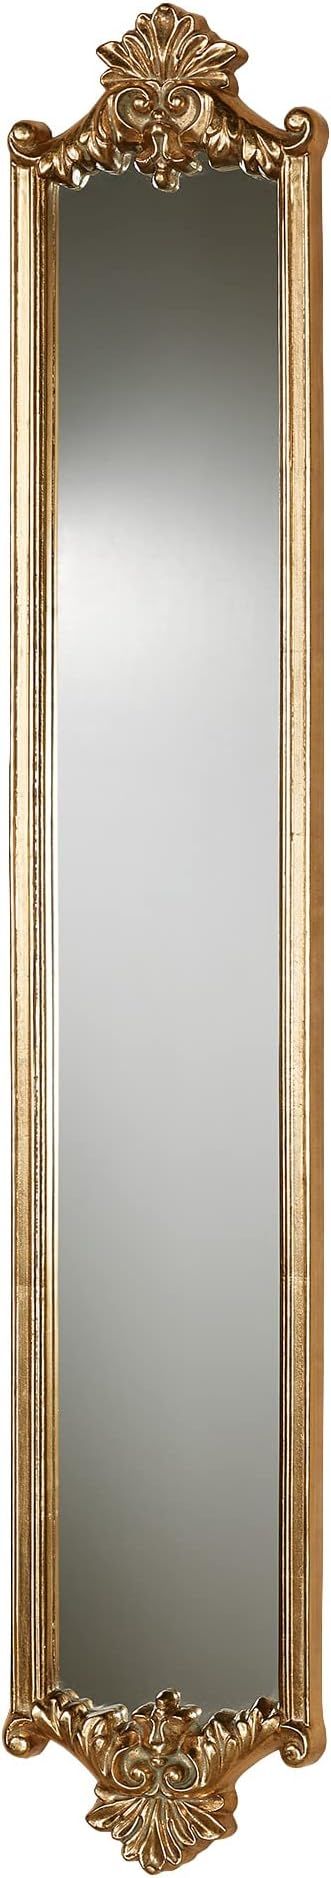 Touch of Class Alistair Wall Mirror Panel - Resin, Glass - Gold Leaf Finish - Slender Mirror for ... | Amazon (US)